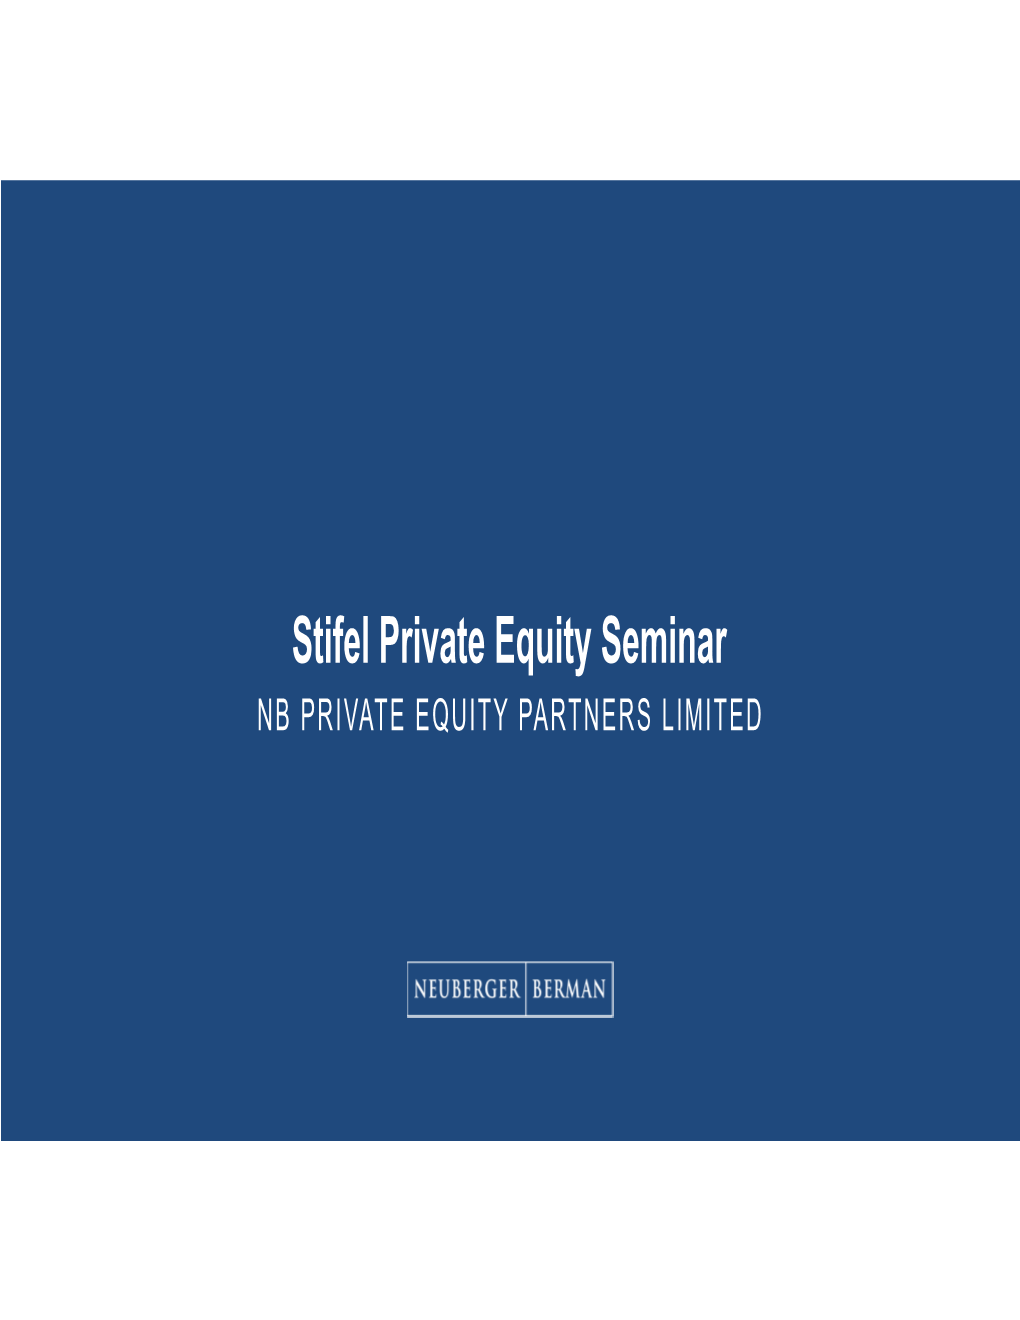 Private Equity Seminar NB PRIVATE EQUITY PARTNERS LIMITED